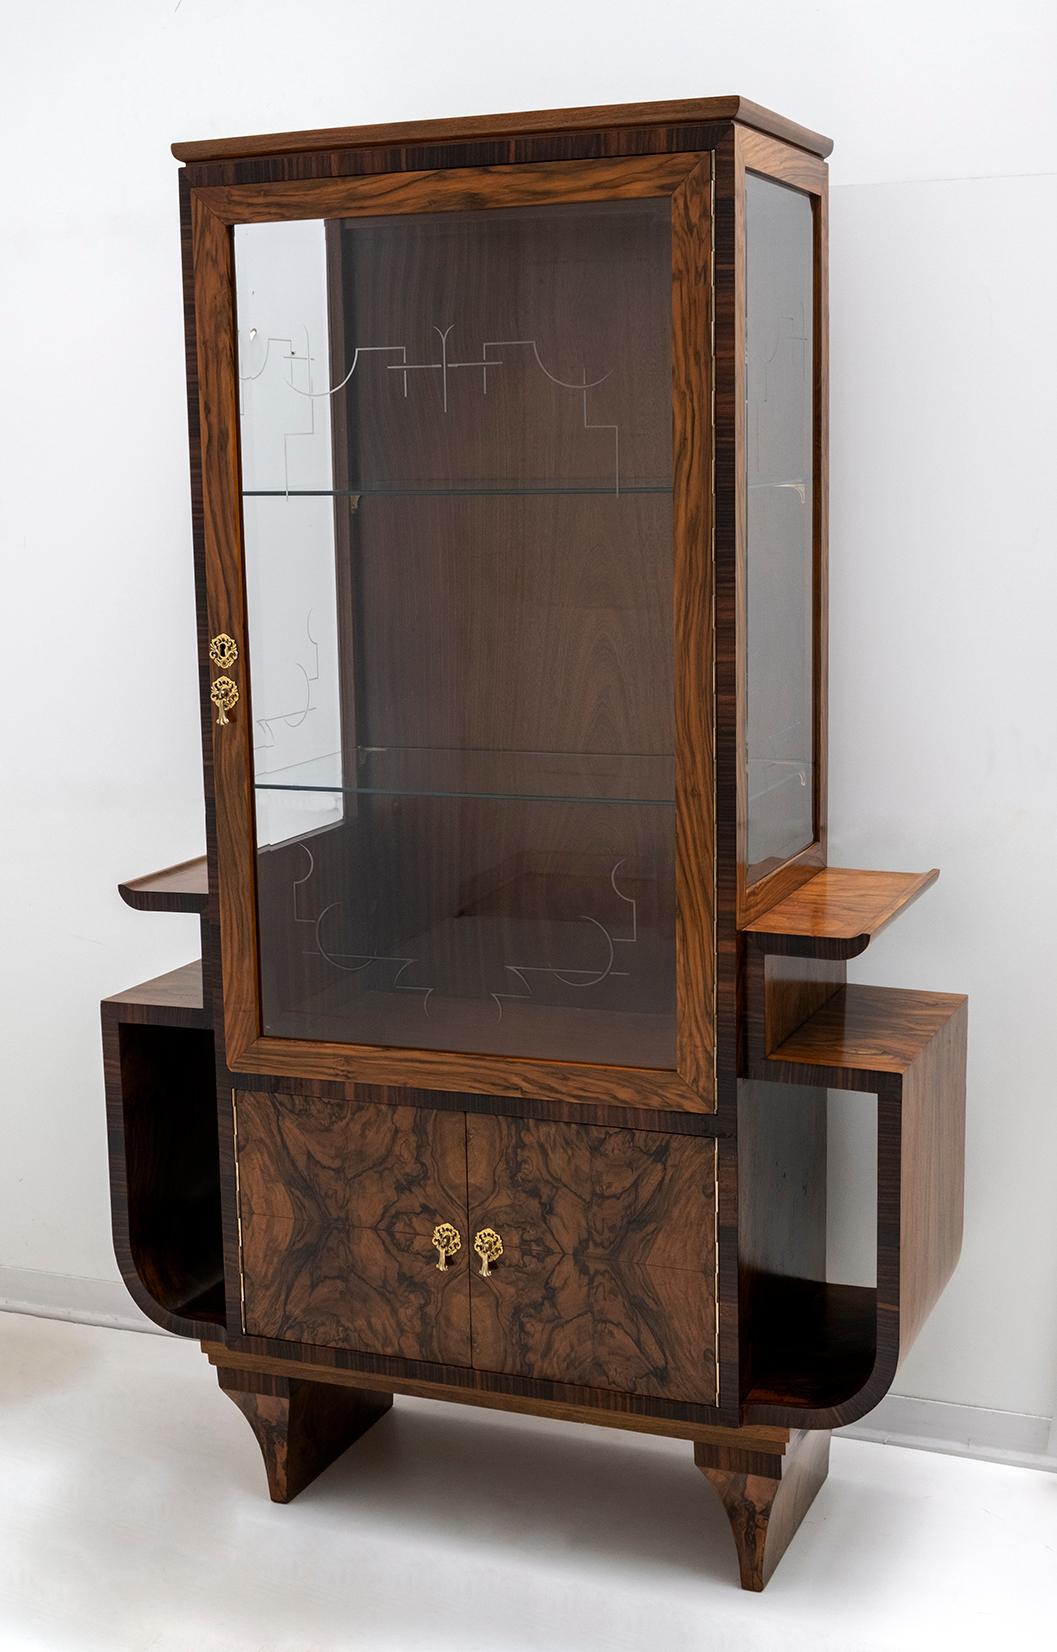 Art Dèco vitrines or display cabinet, Italian production of the 1920s, in walnut and walnut briar, screen-printed glass with grinding around. The showcase has been restored and polished with shellac.